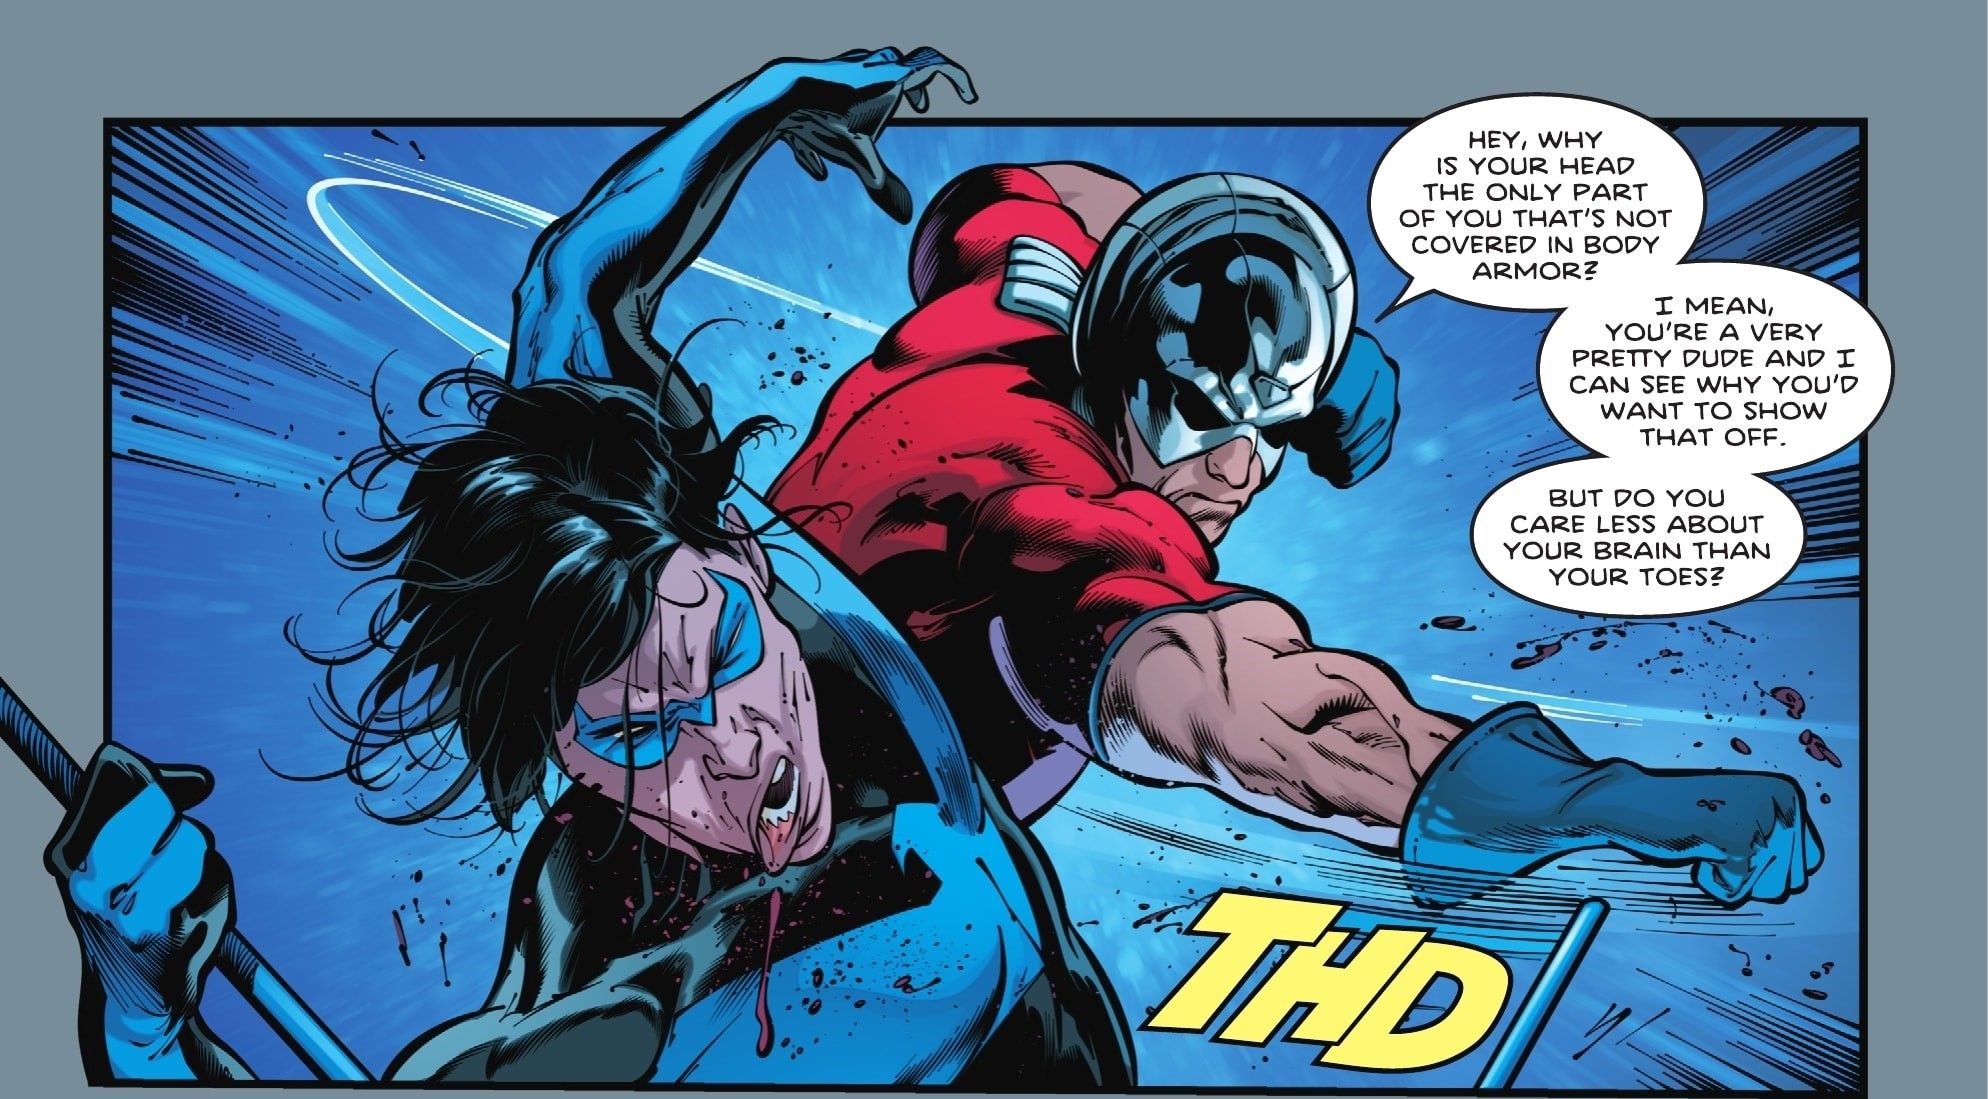 TITANS BEAST WORLD #5 featuring Peacemaker punching Nightwing in the face.